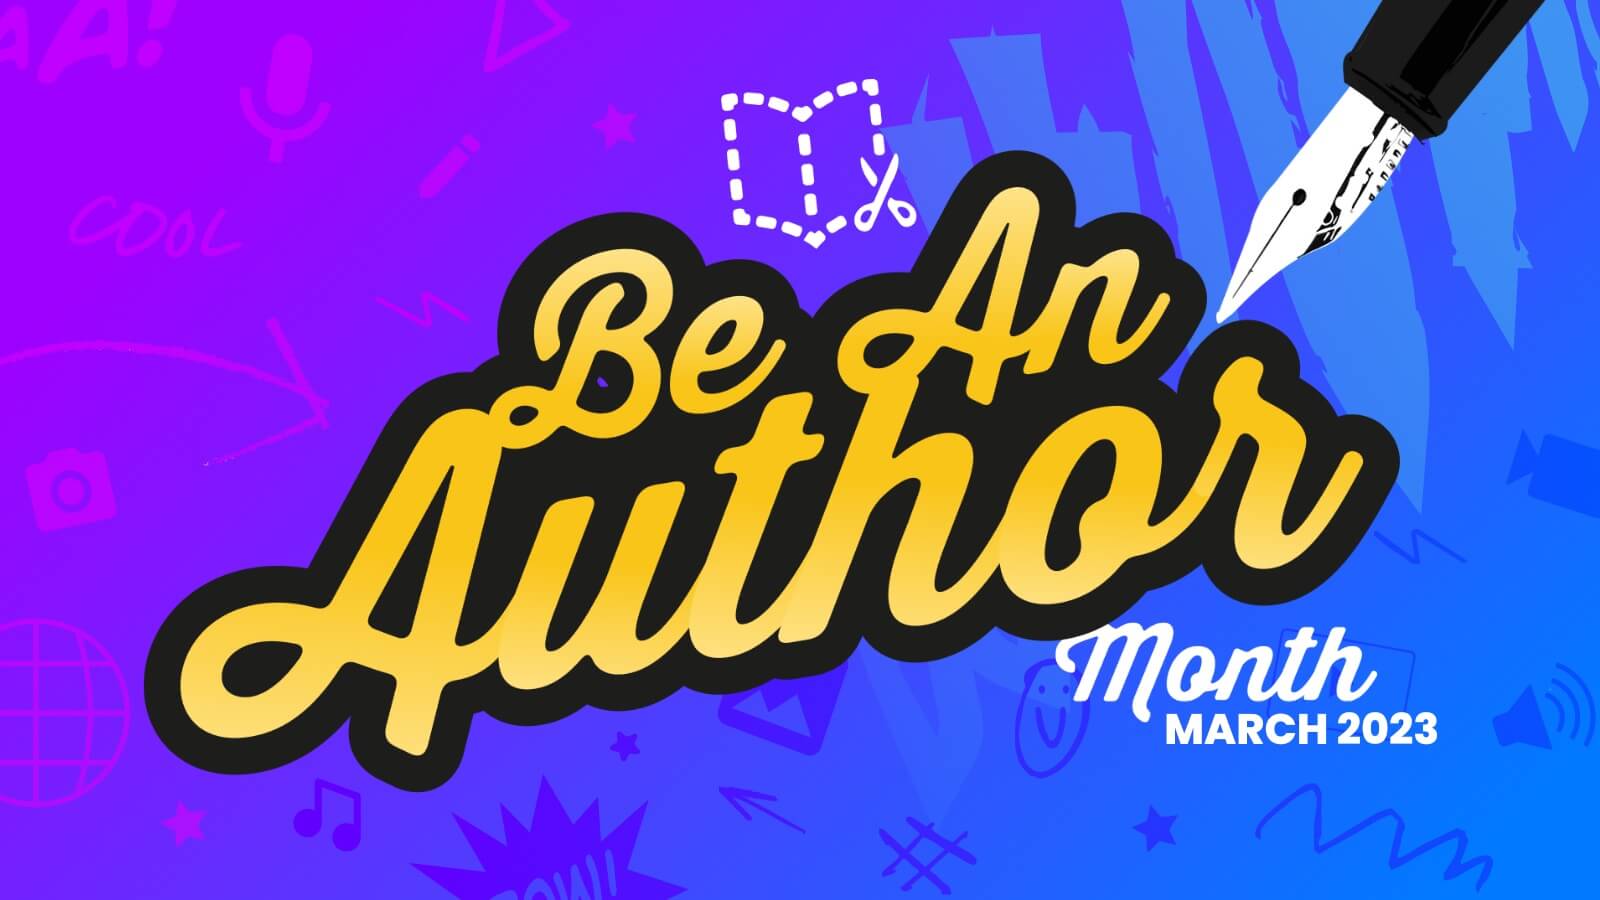 Be An Author March 2023